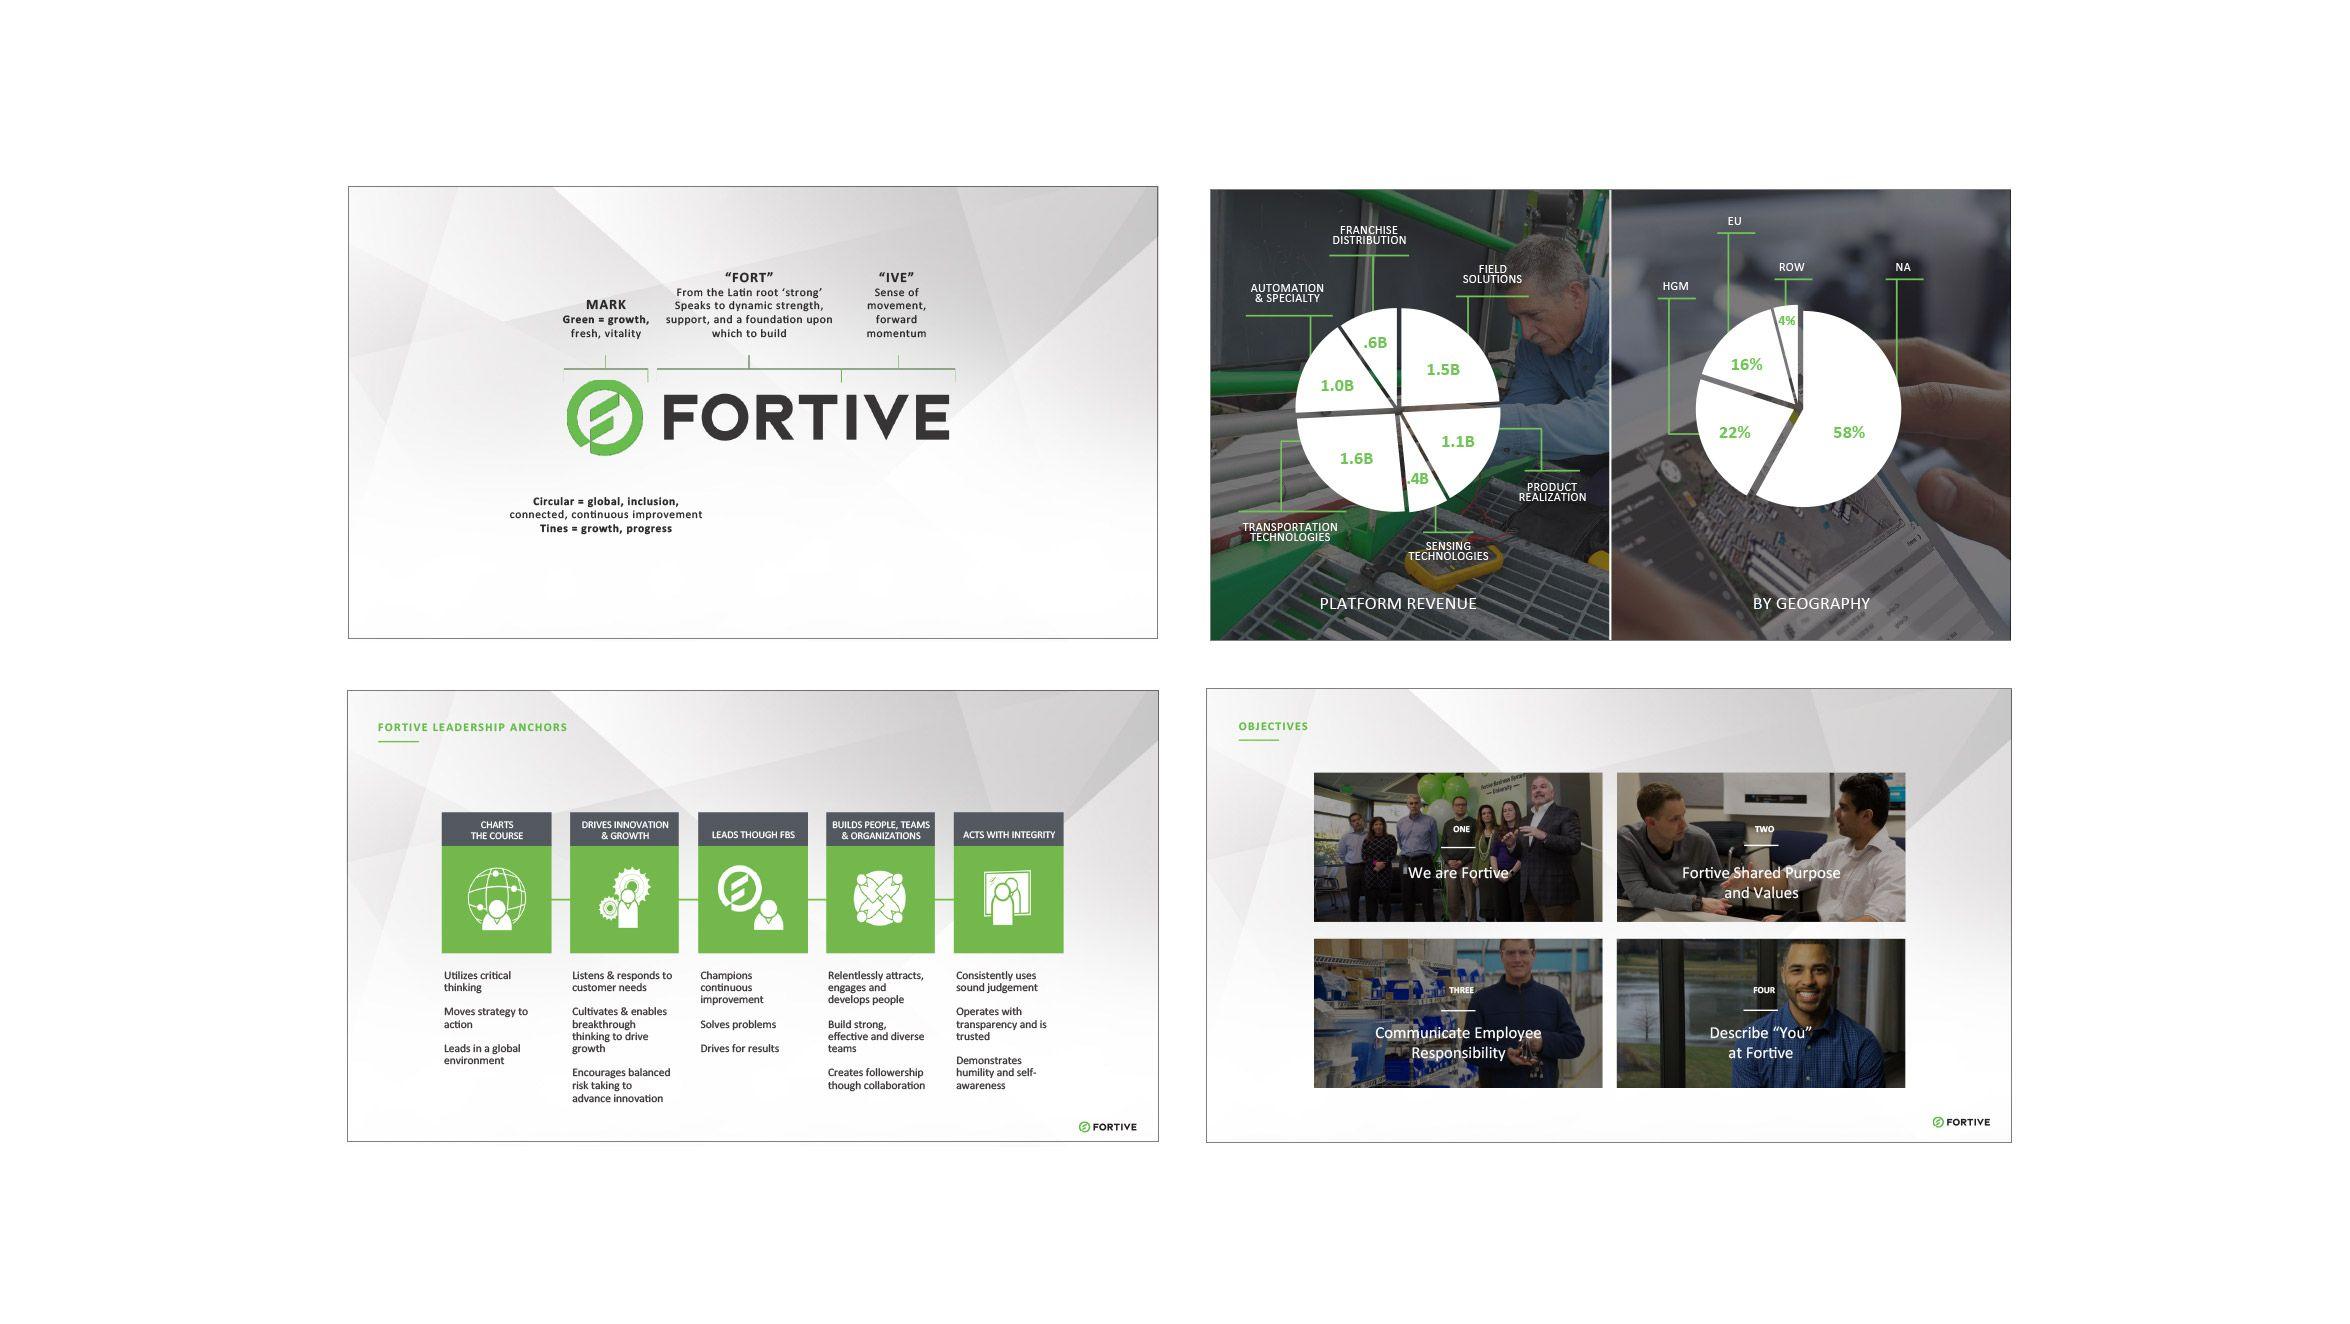 Fortive Logo - Launching a New Company and Brand: Fortive / Vignette